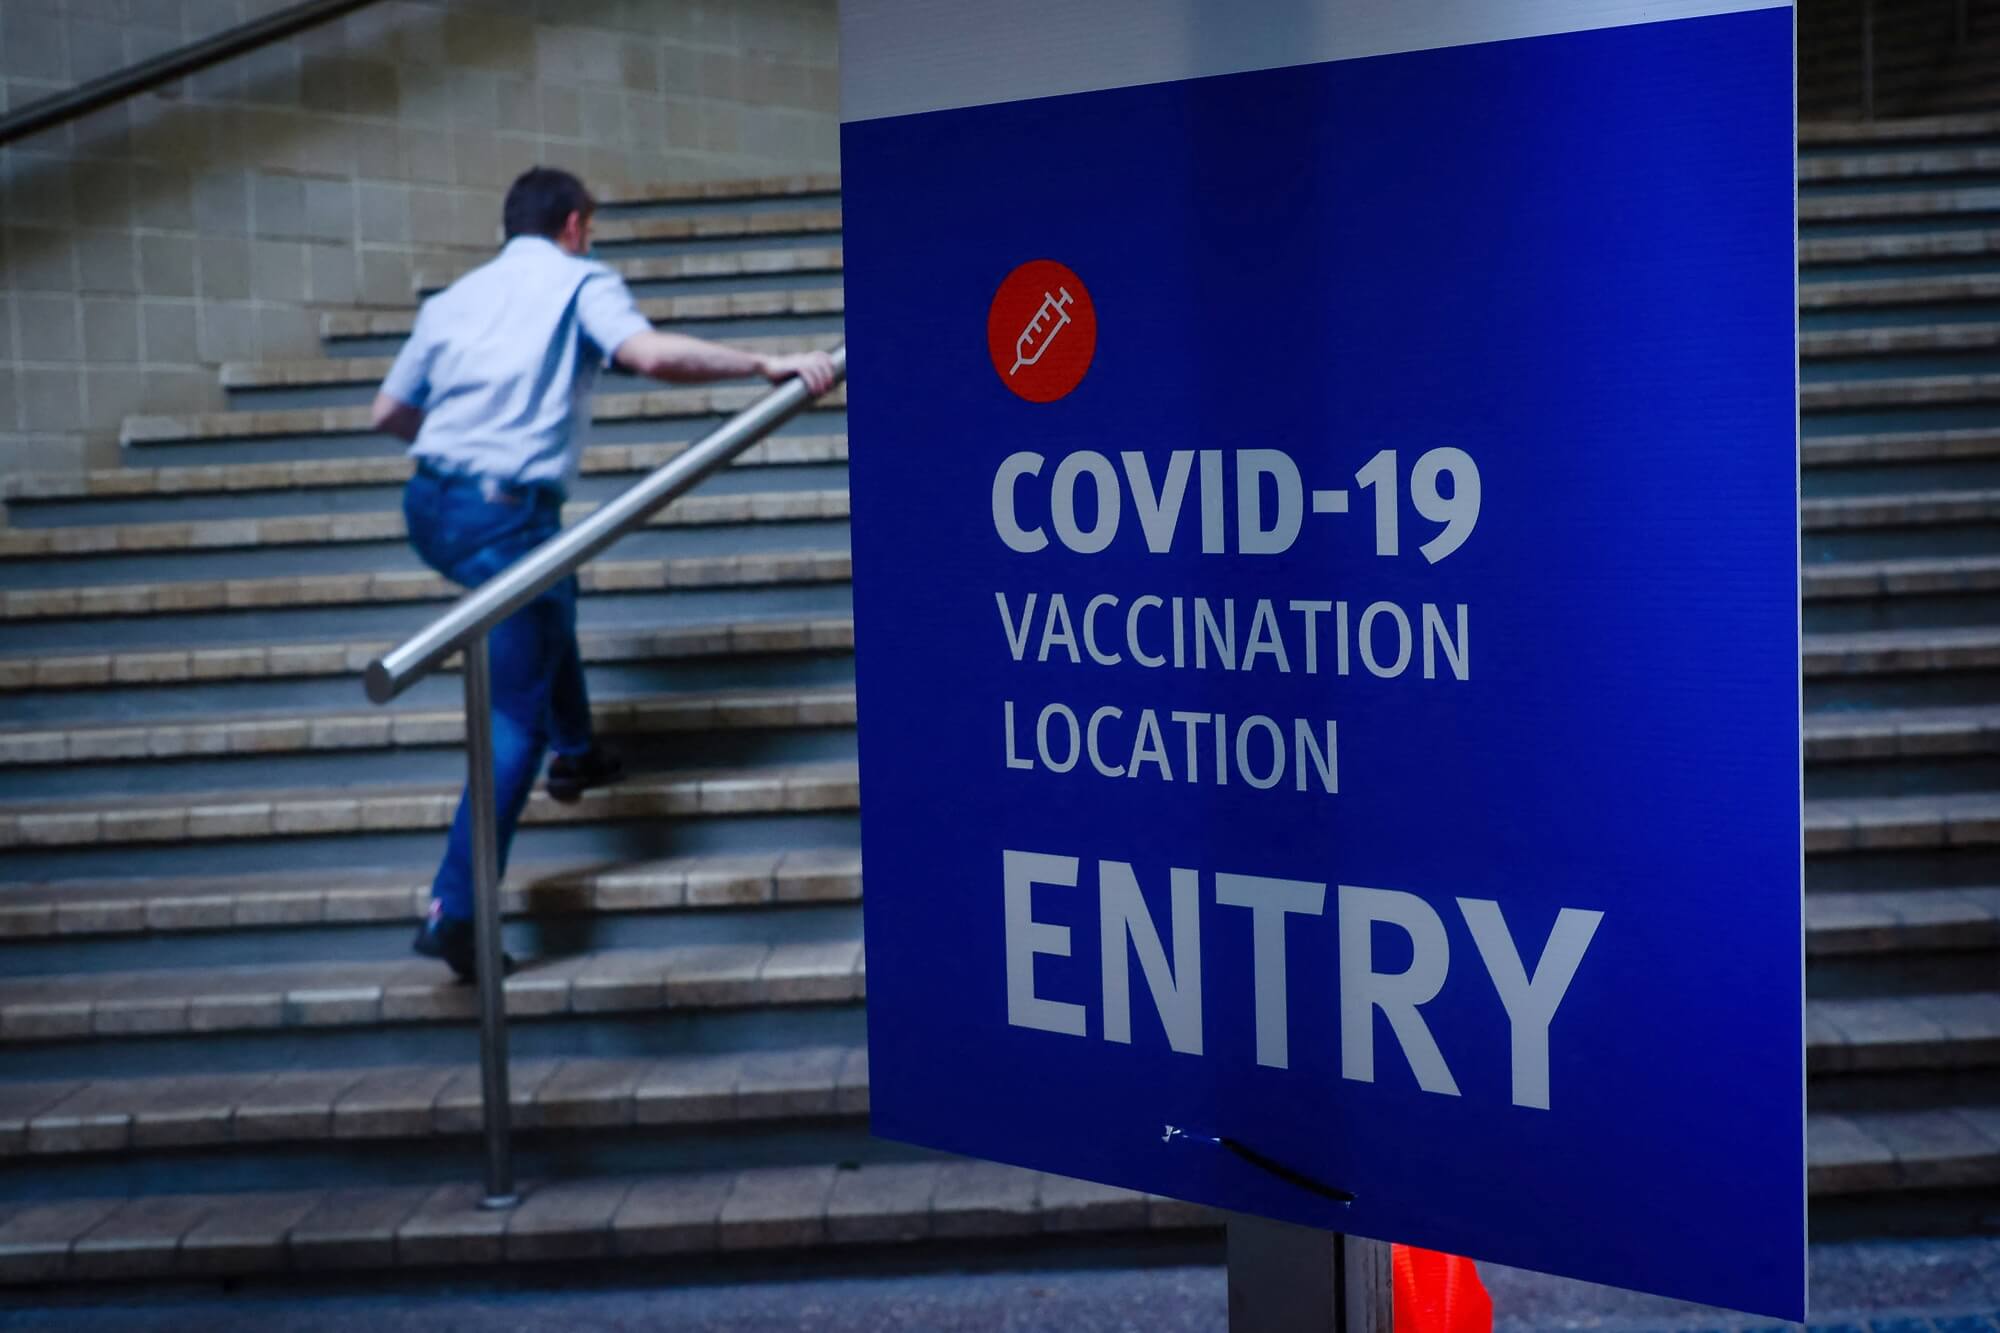 Australia’s international borders closer to reopening with digital vaccination passports